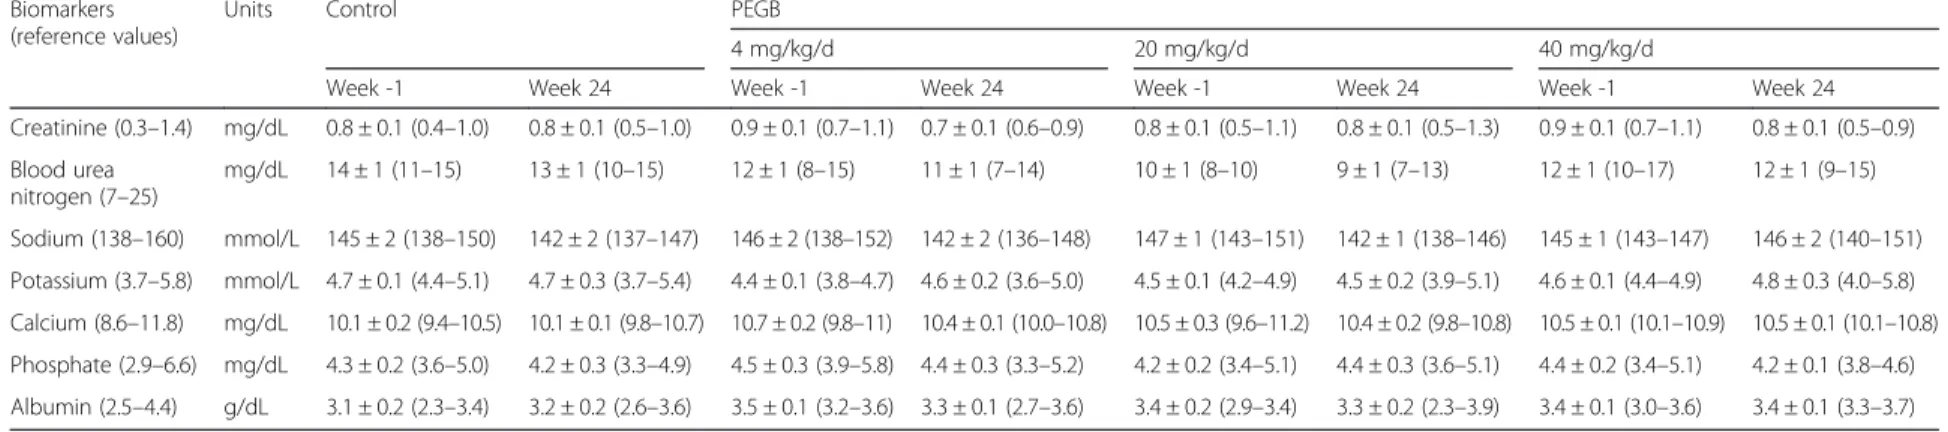 Table 1 Plasma biomarkers of kidney damage in dogs, at the initiation (Week -1) and the end (Week 24) of a 24-wk period of consumption of PEGB at 4, 20 or 40 mg/kg/d.